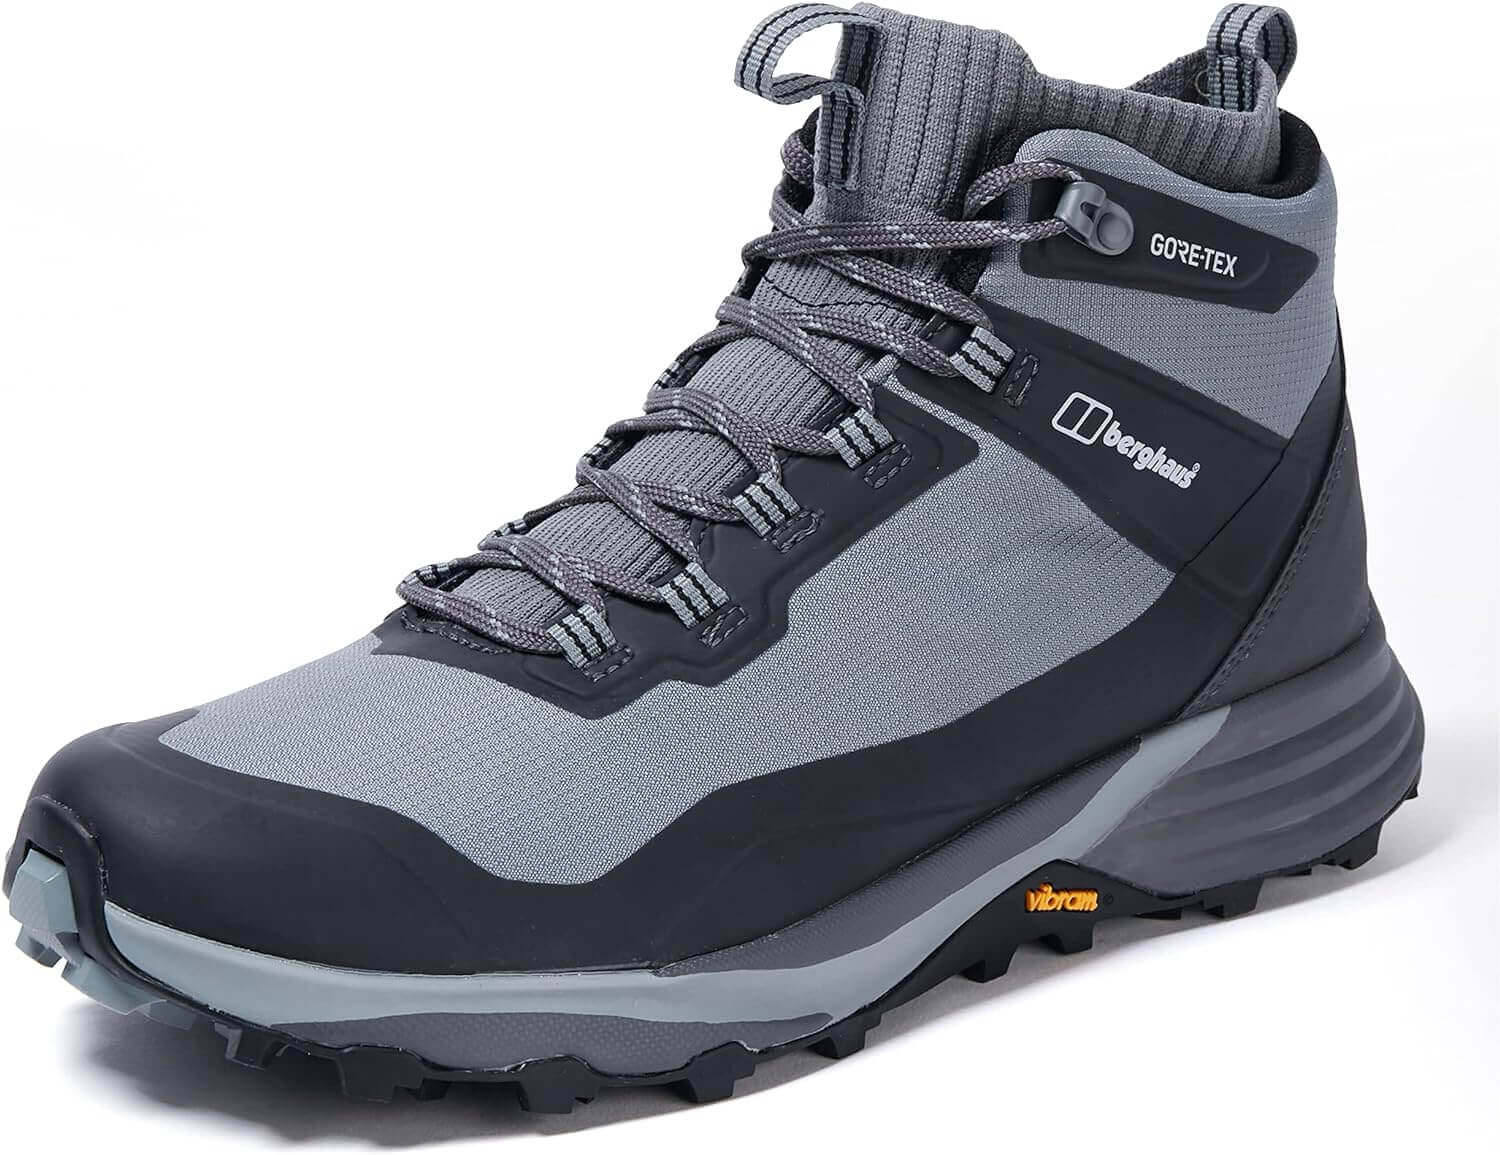 Shop The Latest >Berghaus VC22 Mid Gore-Tex Women's Outdoor Walking Boot > *Only $175.51*> From The Top Brand > *Berghausl* > Shop Now and Get Free Shipping On Orders Over $45.00 >*Shop Earth Foot*